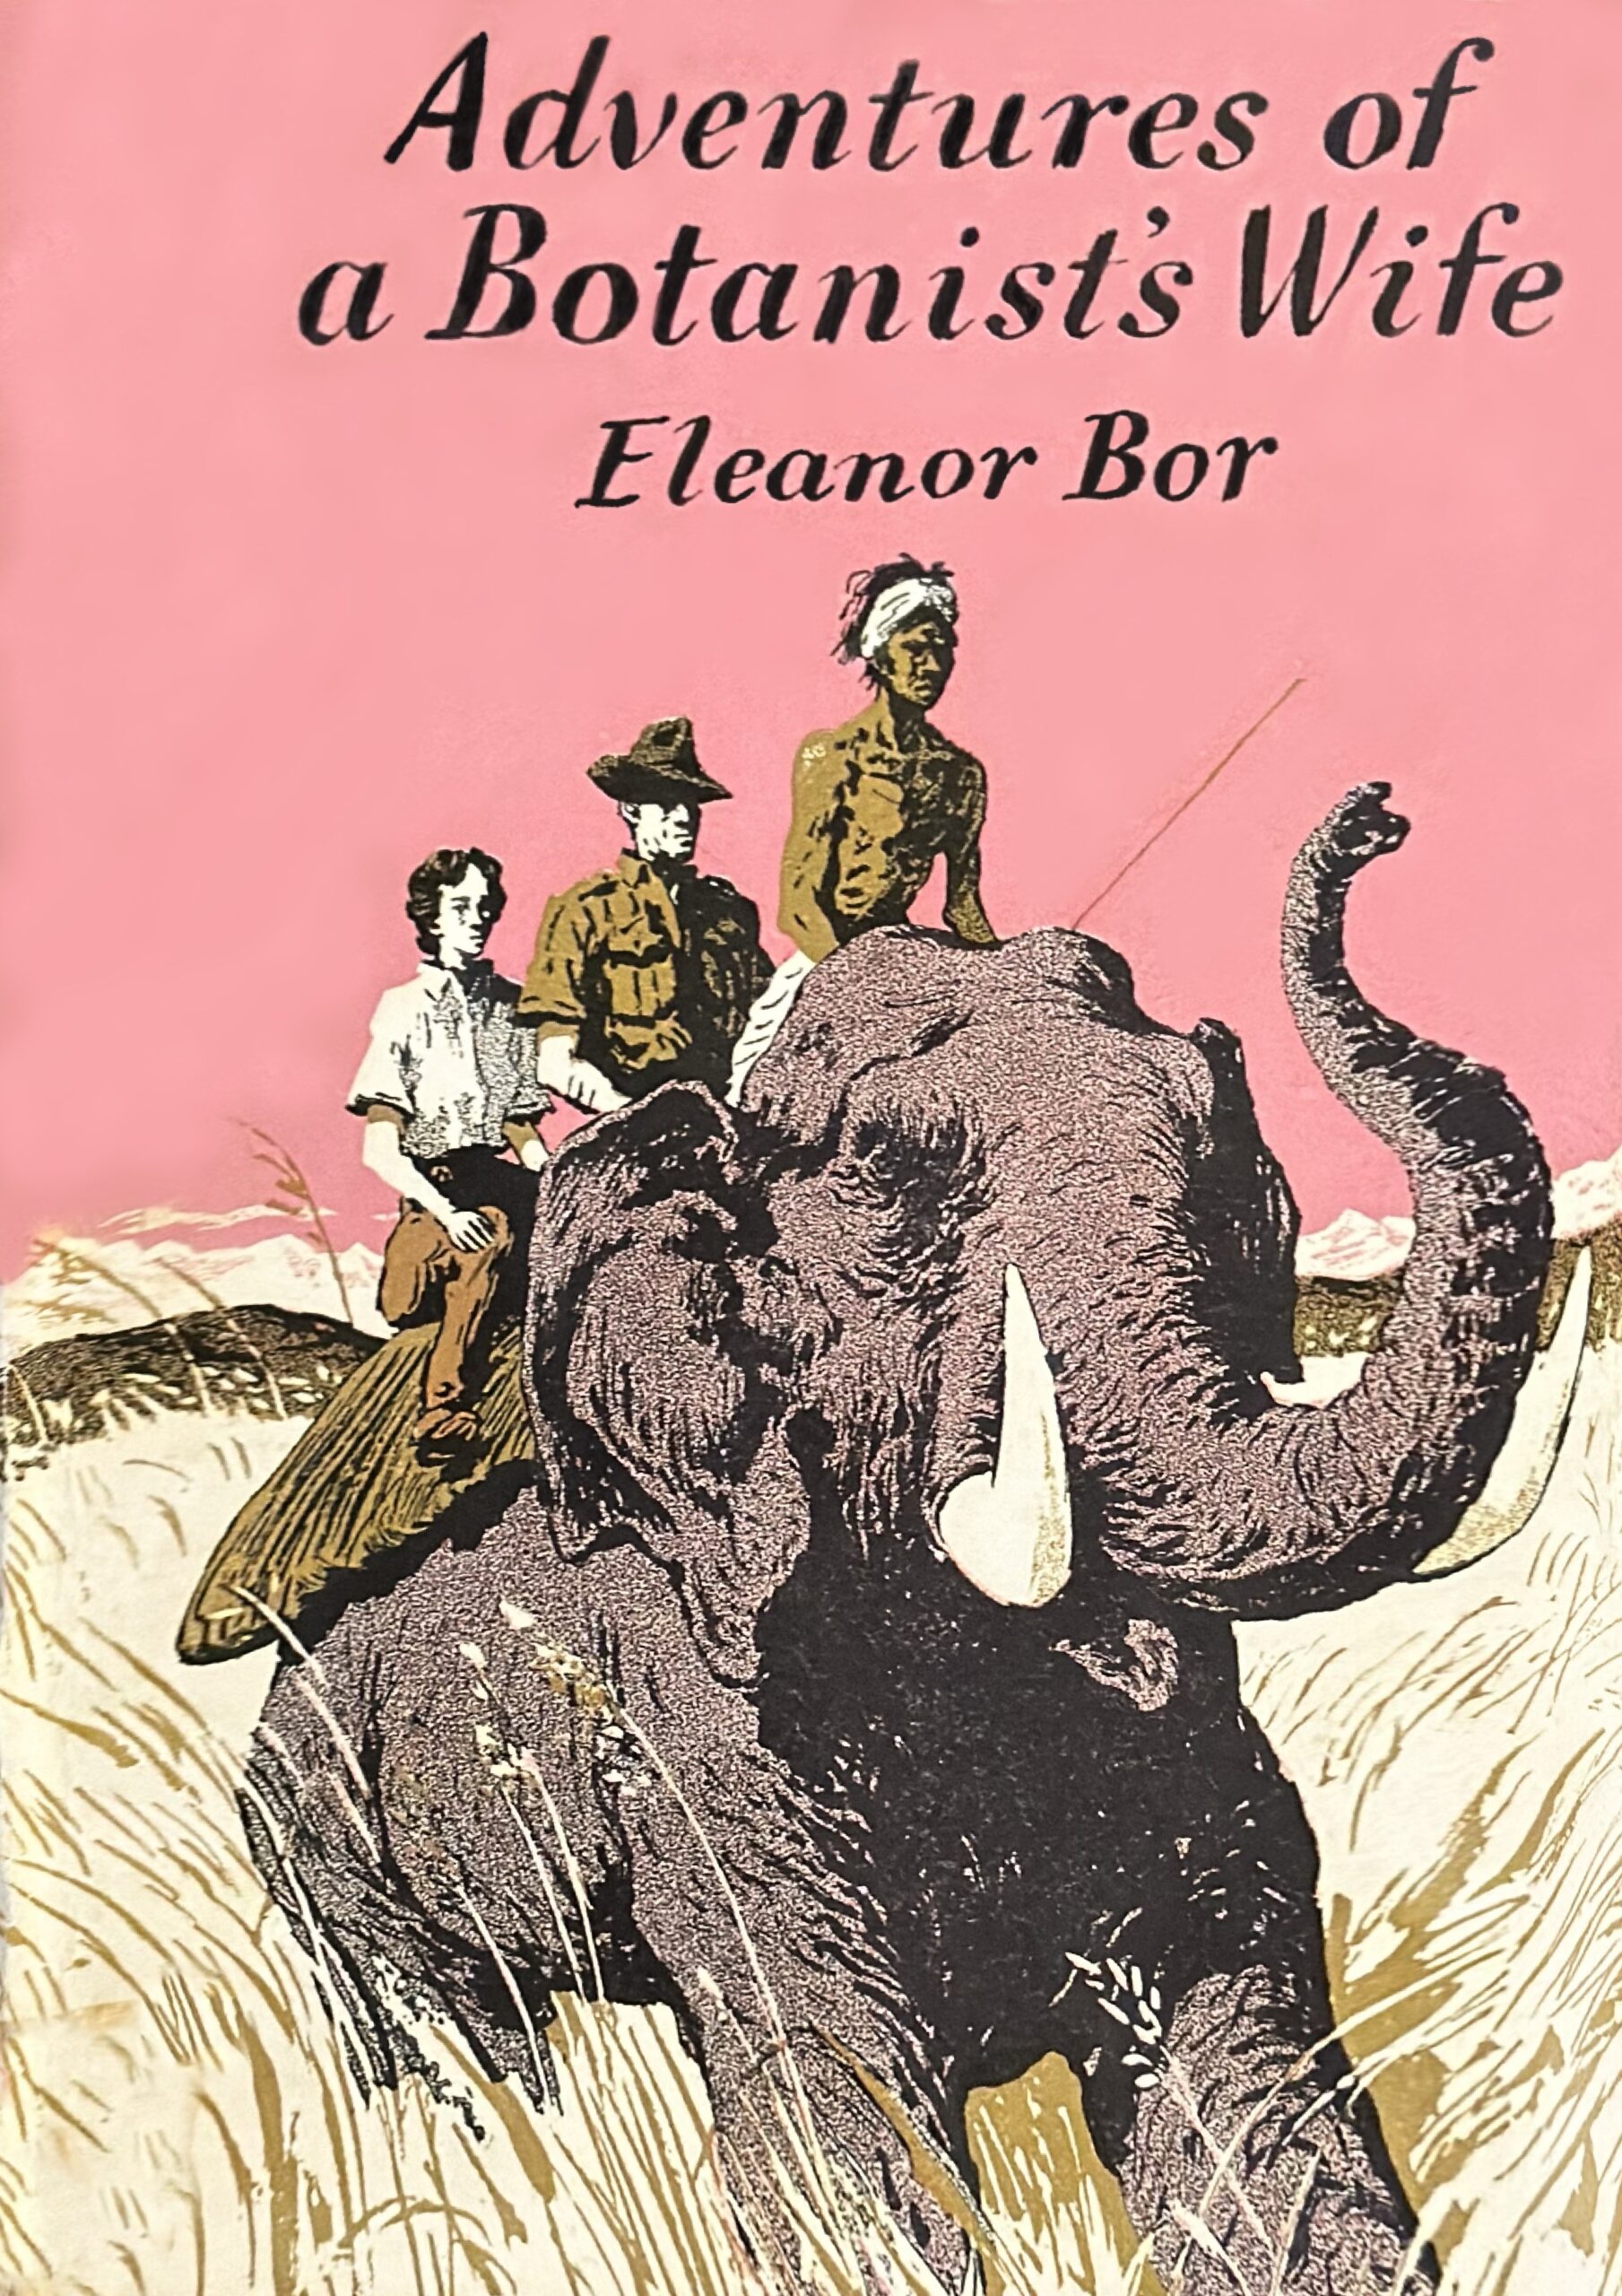 Adventures of a Botanist's Wife by Eleanor Bor